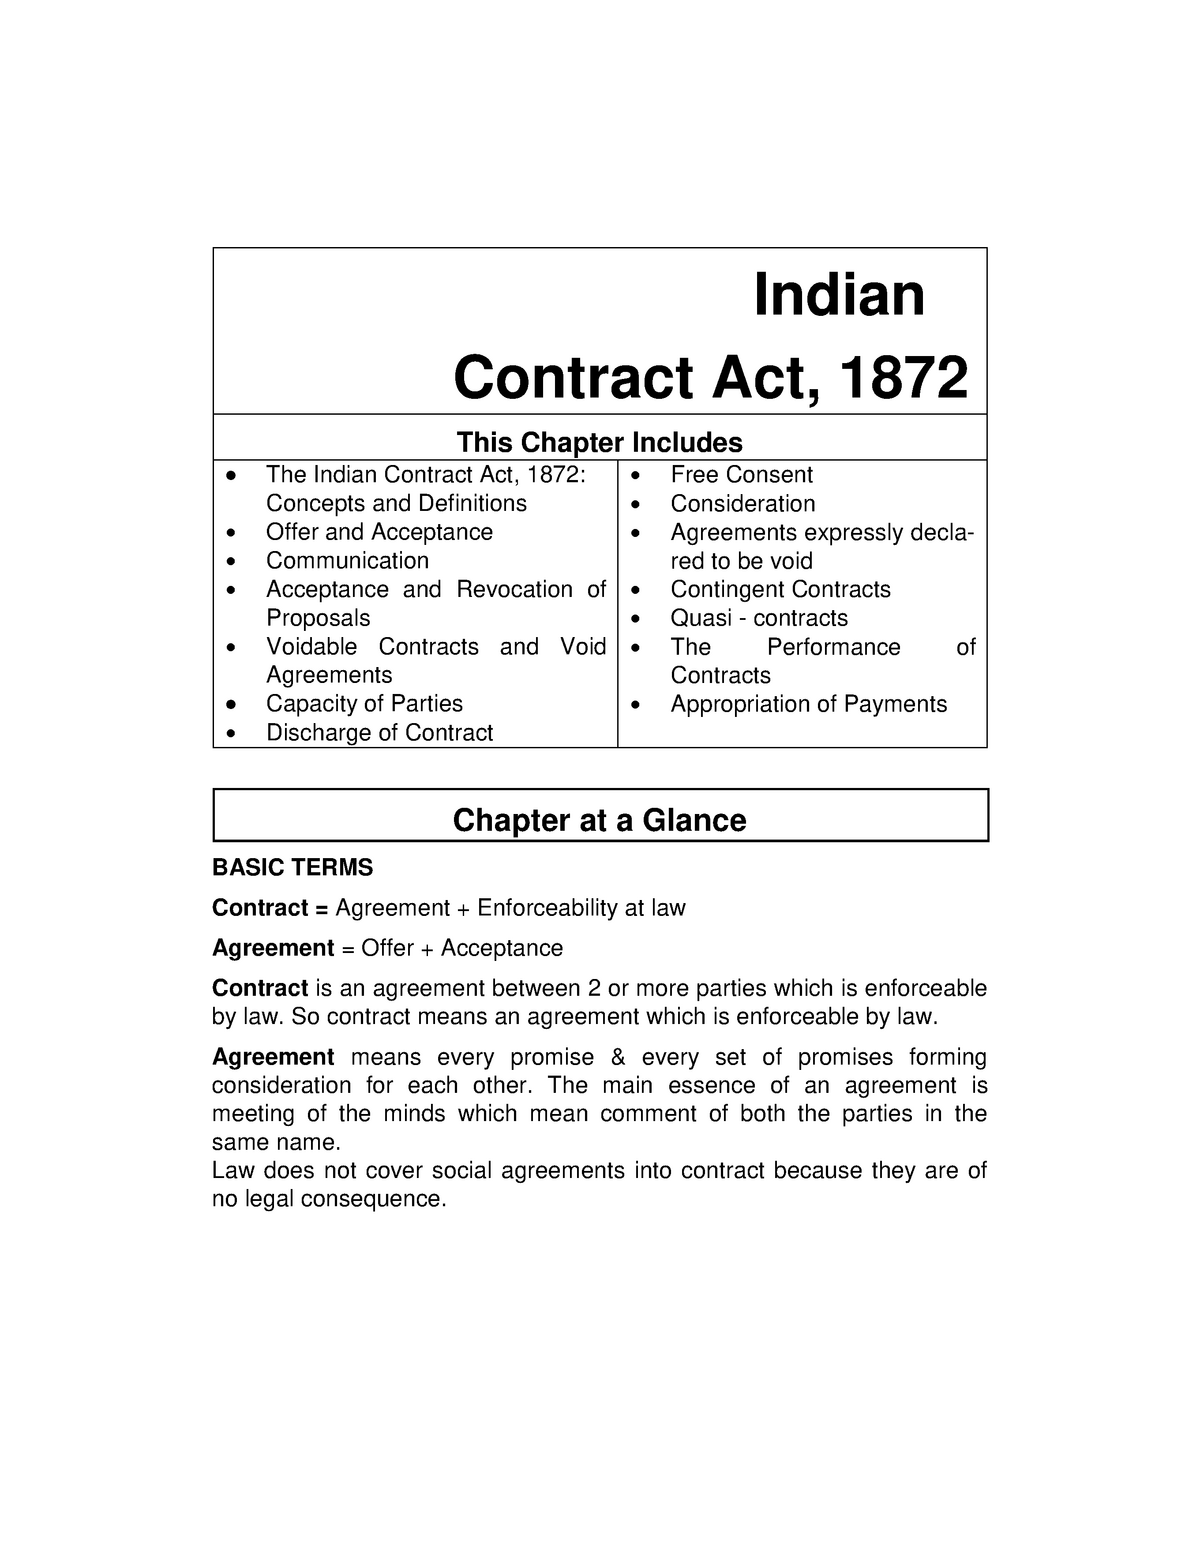 contract act 1872 notes